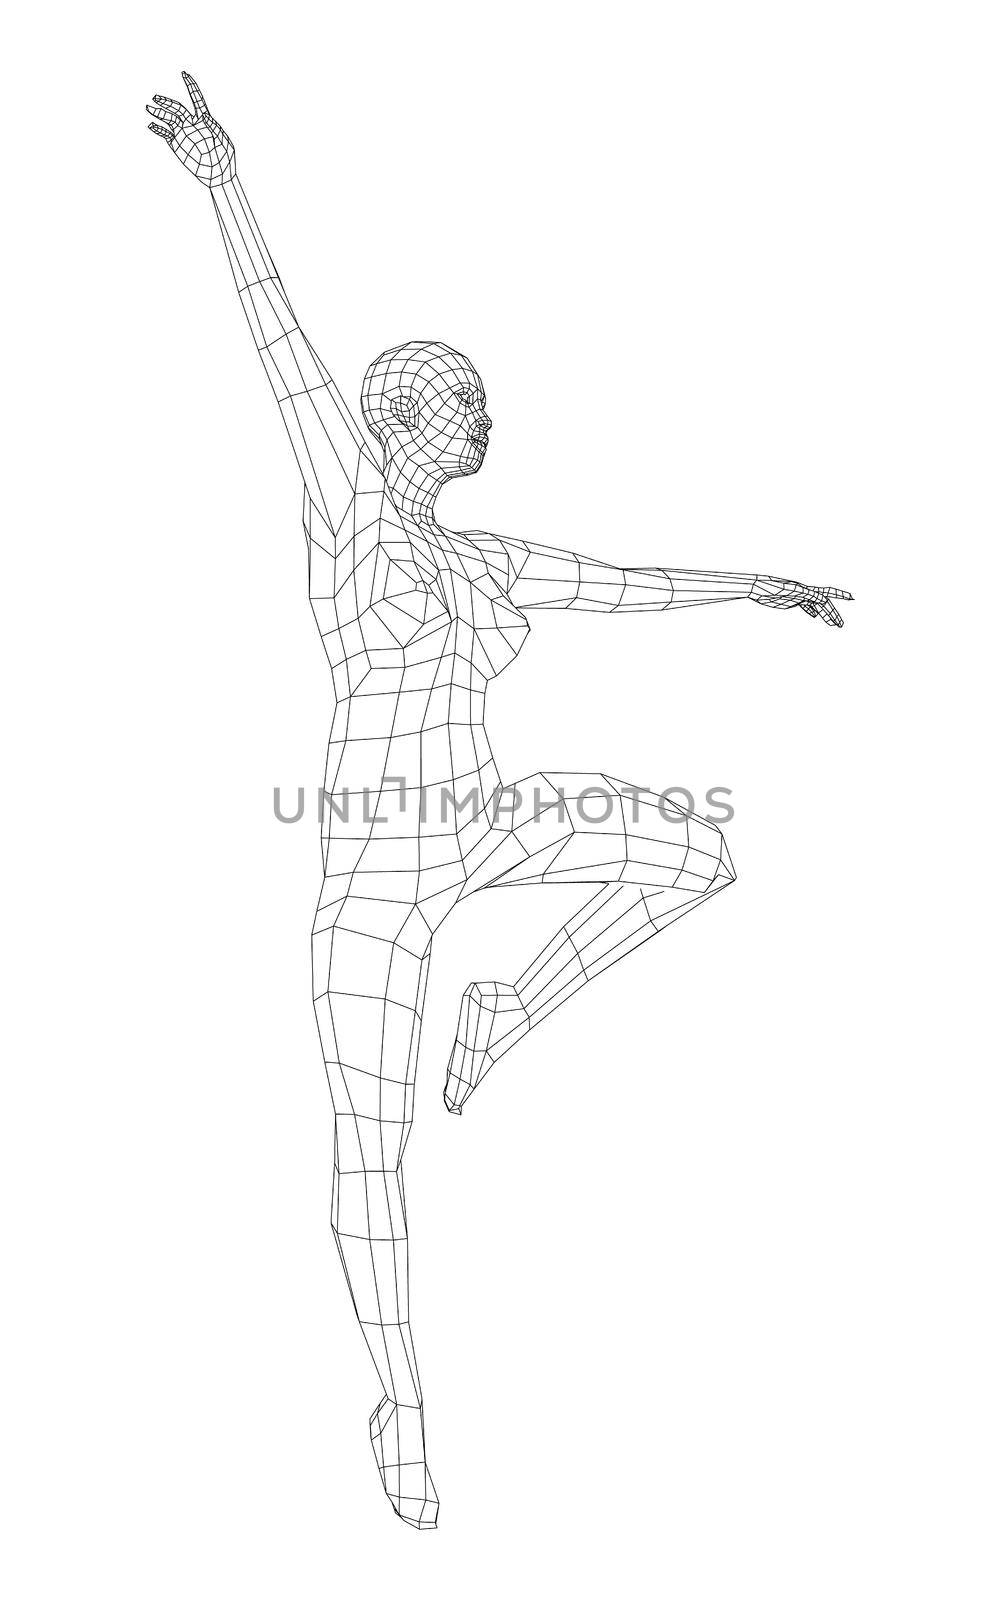 Wireframe ballerina in dance pose by cherezoff